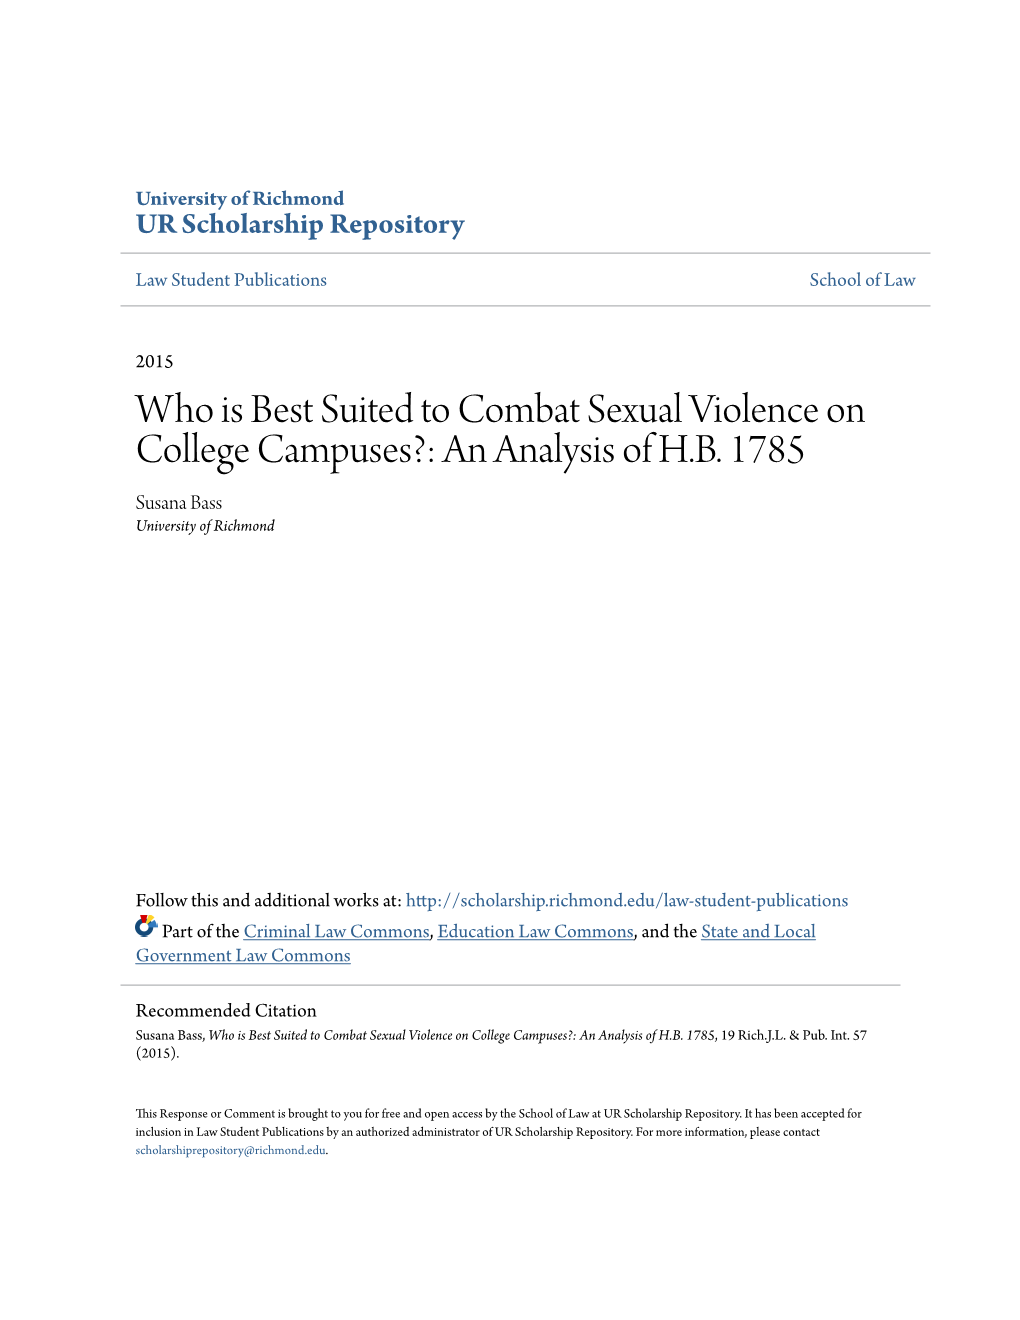 Who Is Best Suited to Combat Sexual Violence on College Campuses?: an Analysis of H.B